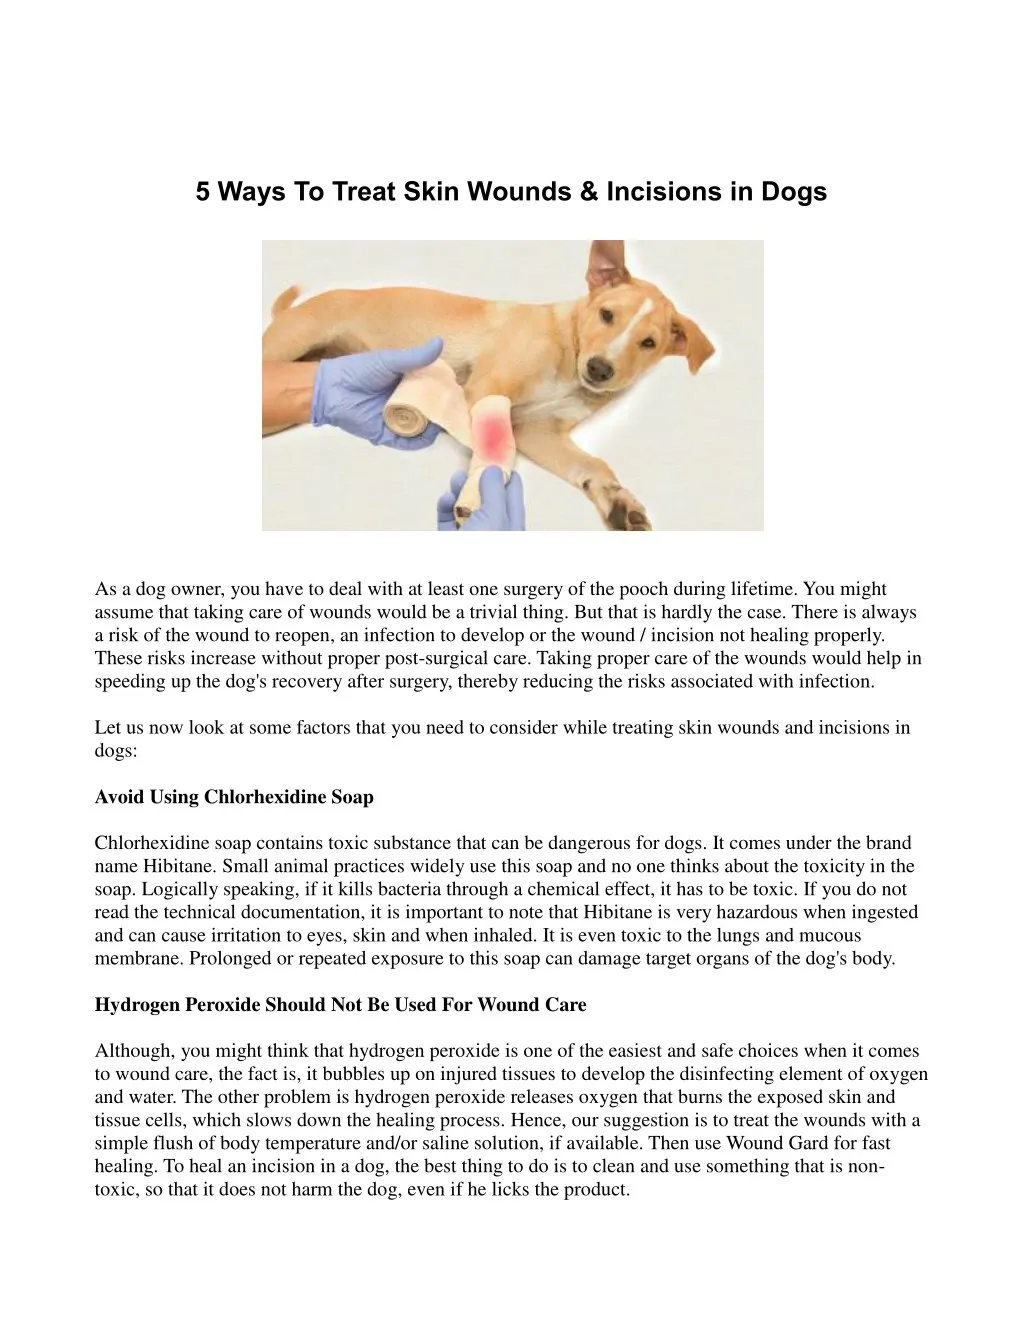 5 ways to treat skin wounds incisions in dogs